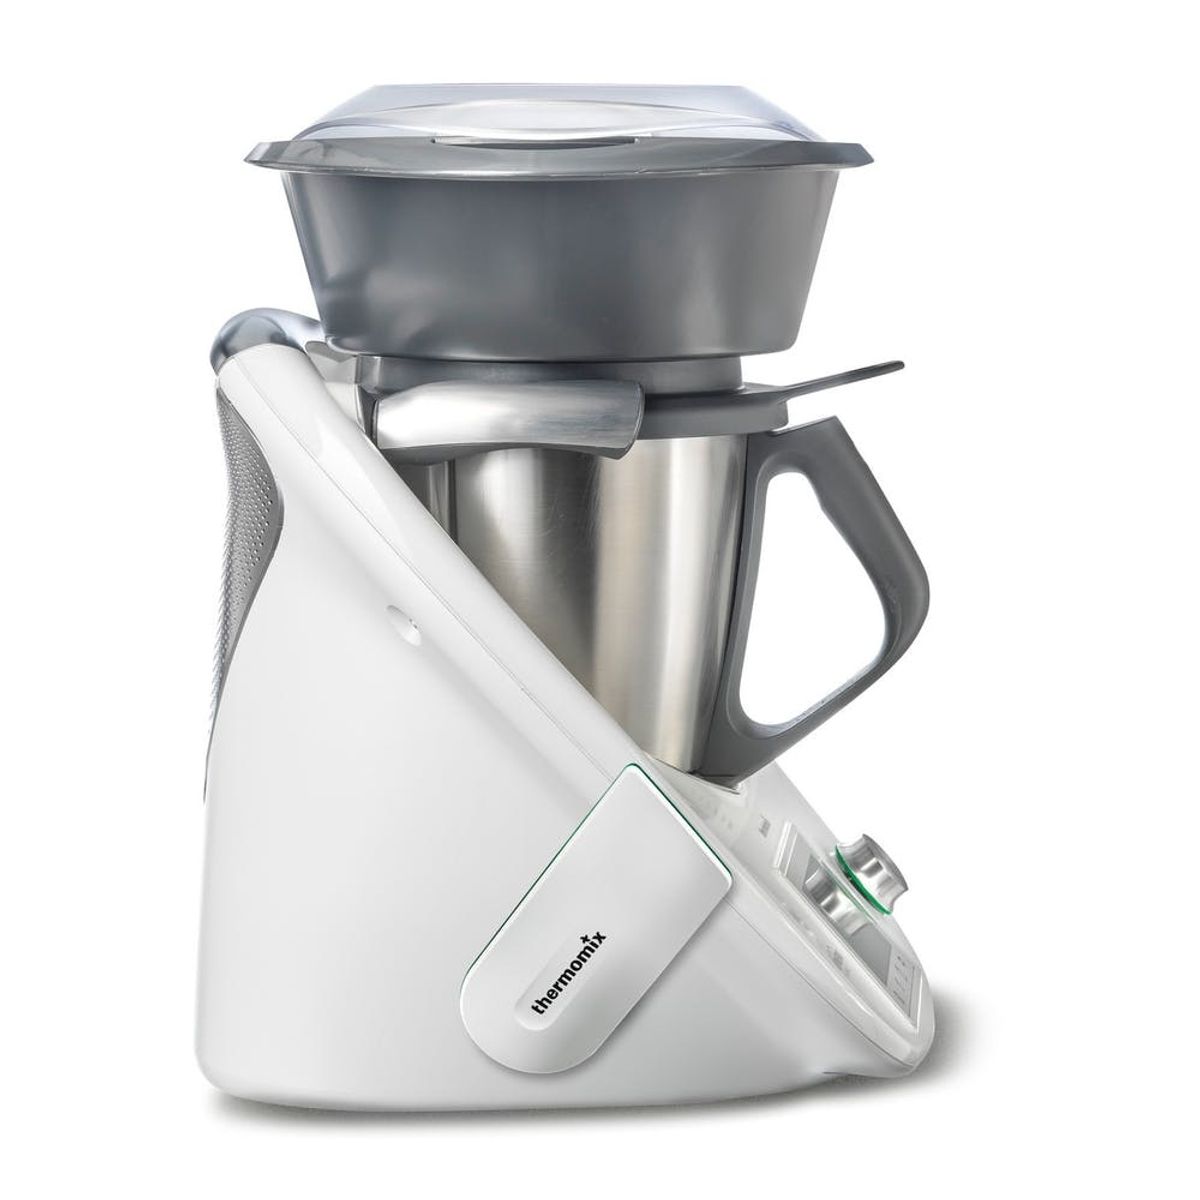 The Thermomix Will Be Your Next Kitchen Appliance Obsession